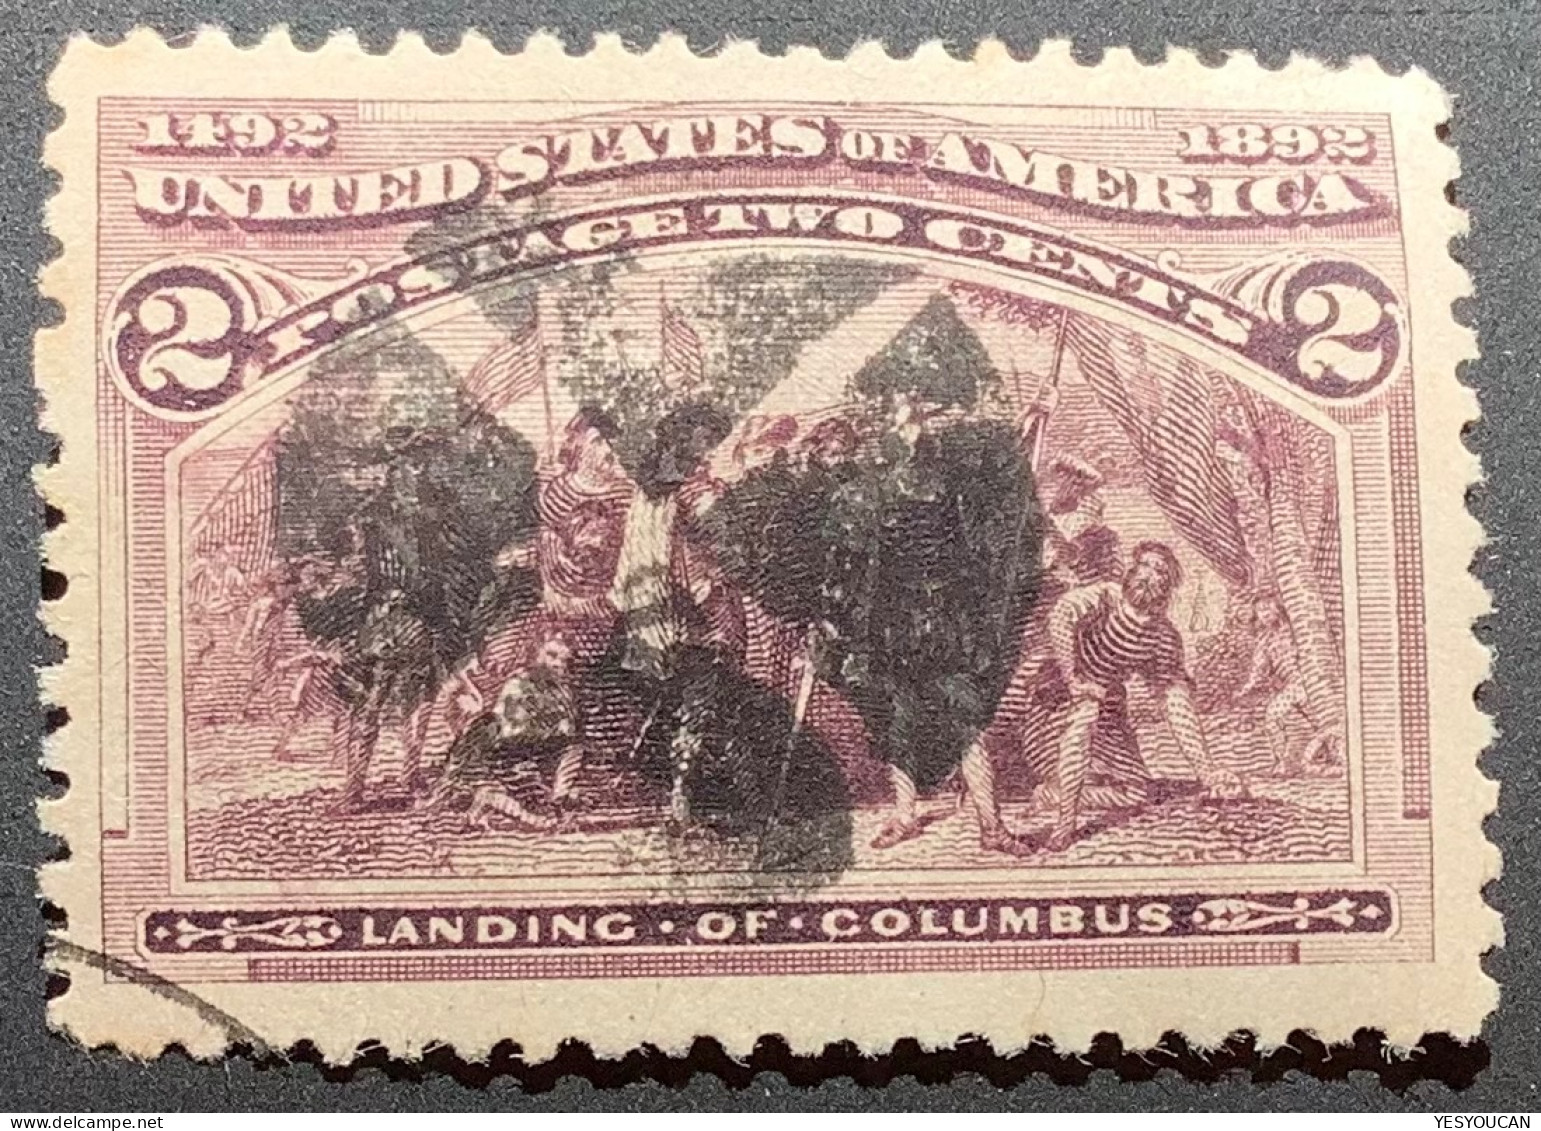 US 1893 2c Columbian (Scott 231) ~XF-SUP 95 Used Gem With Ideal Cancel & Very Well Centered Jumbo Margins (USA PSE - Used Stamps